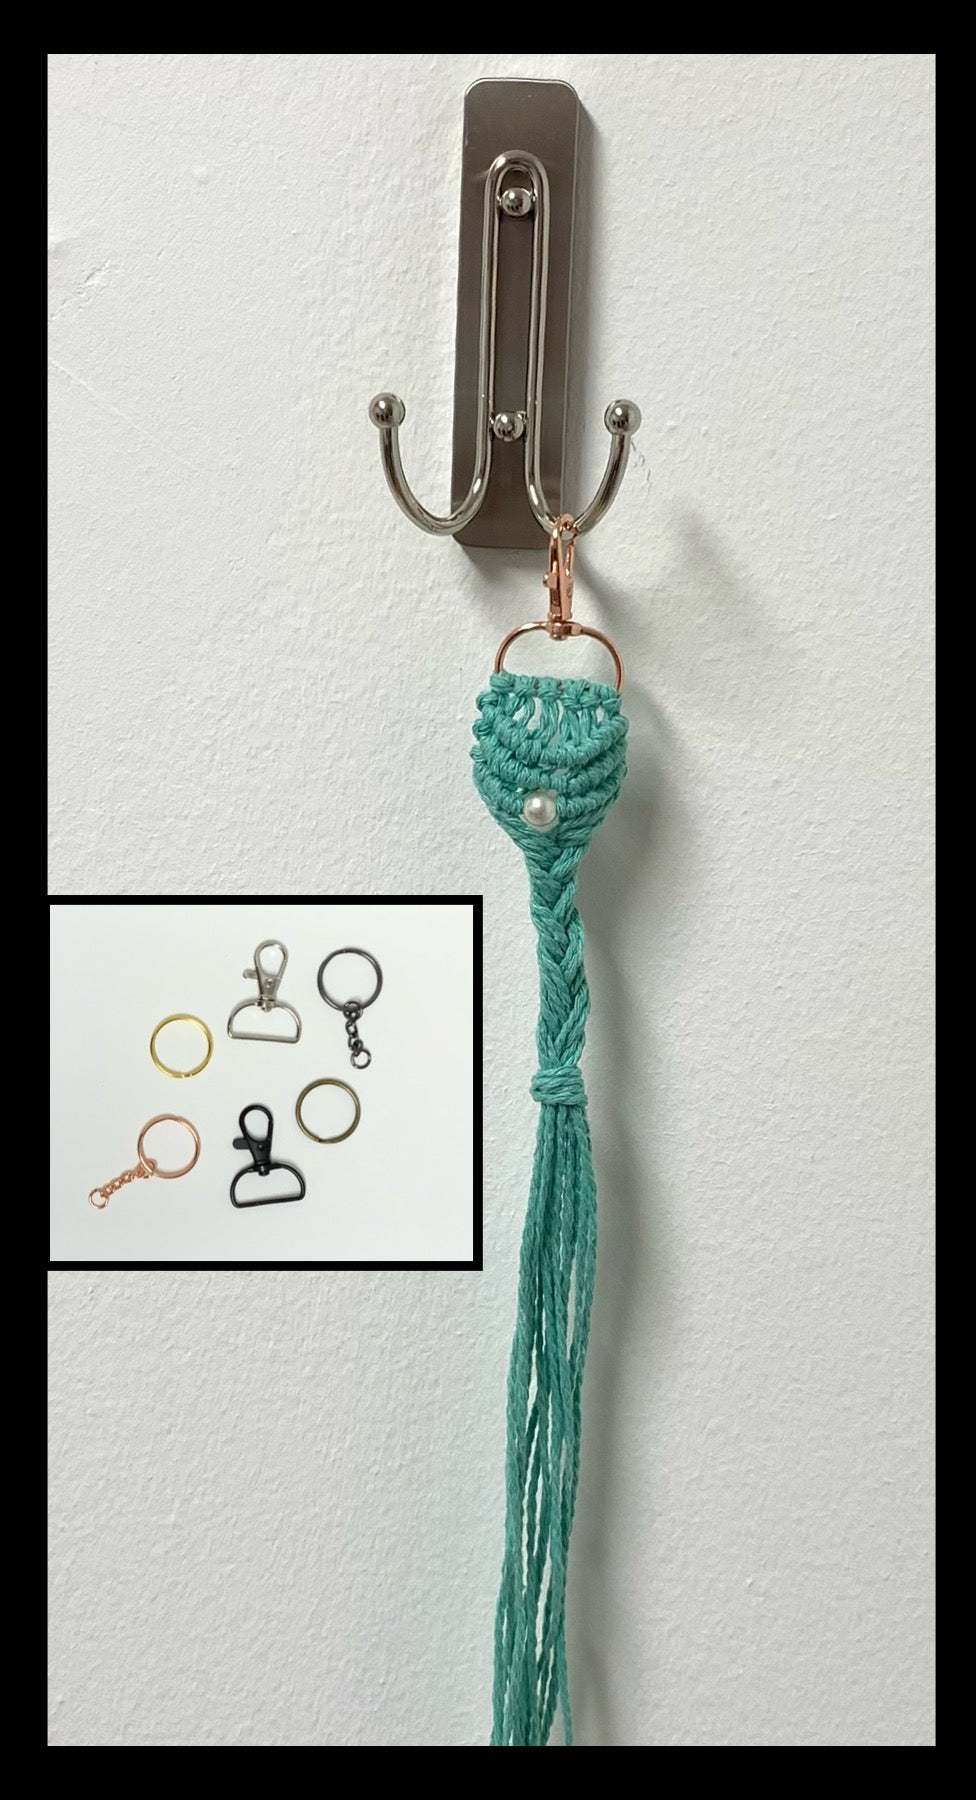 Mermaid Hair Macrame Keychain and an inset picture of Keychain Hardware.